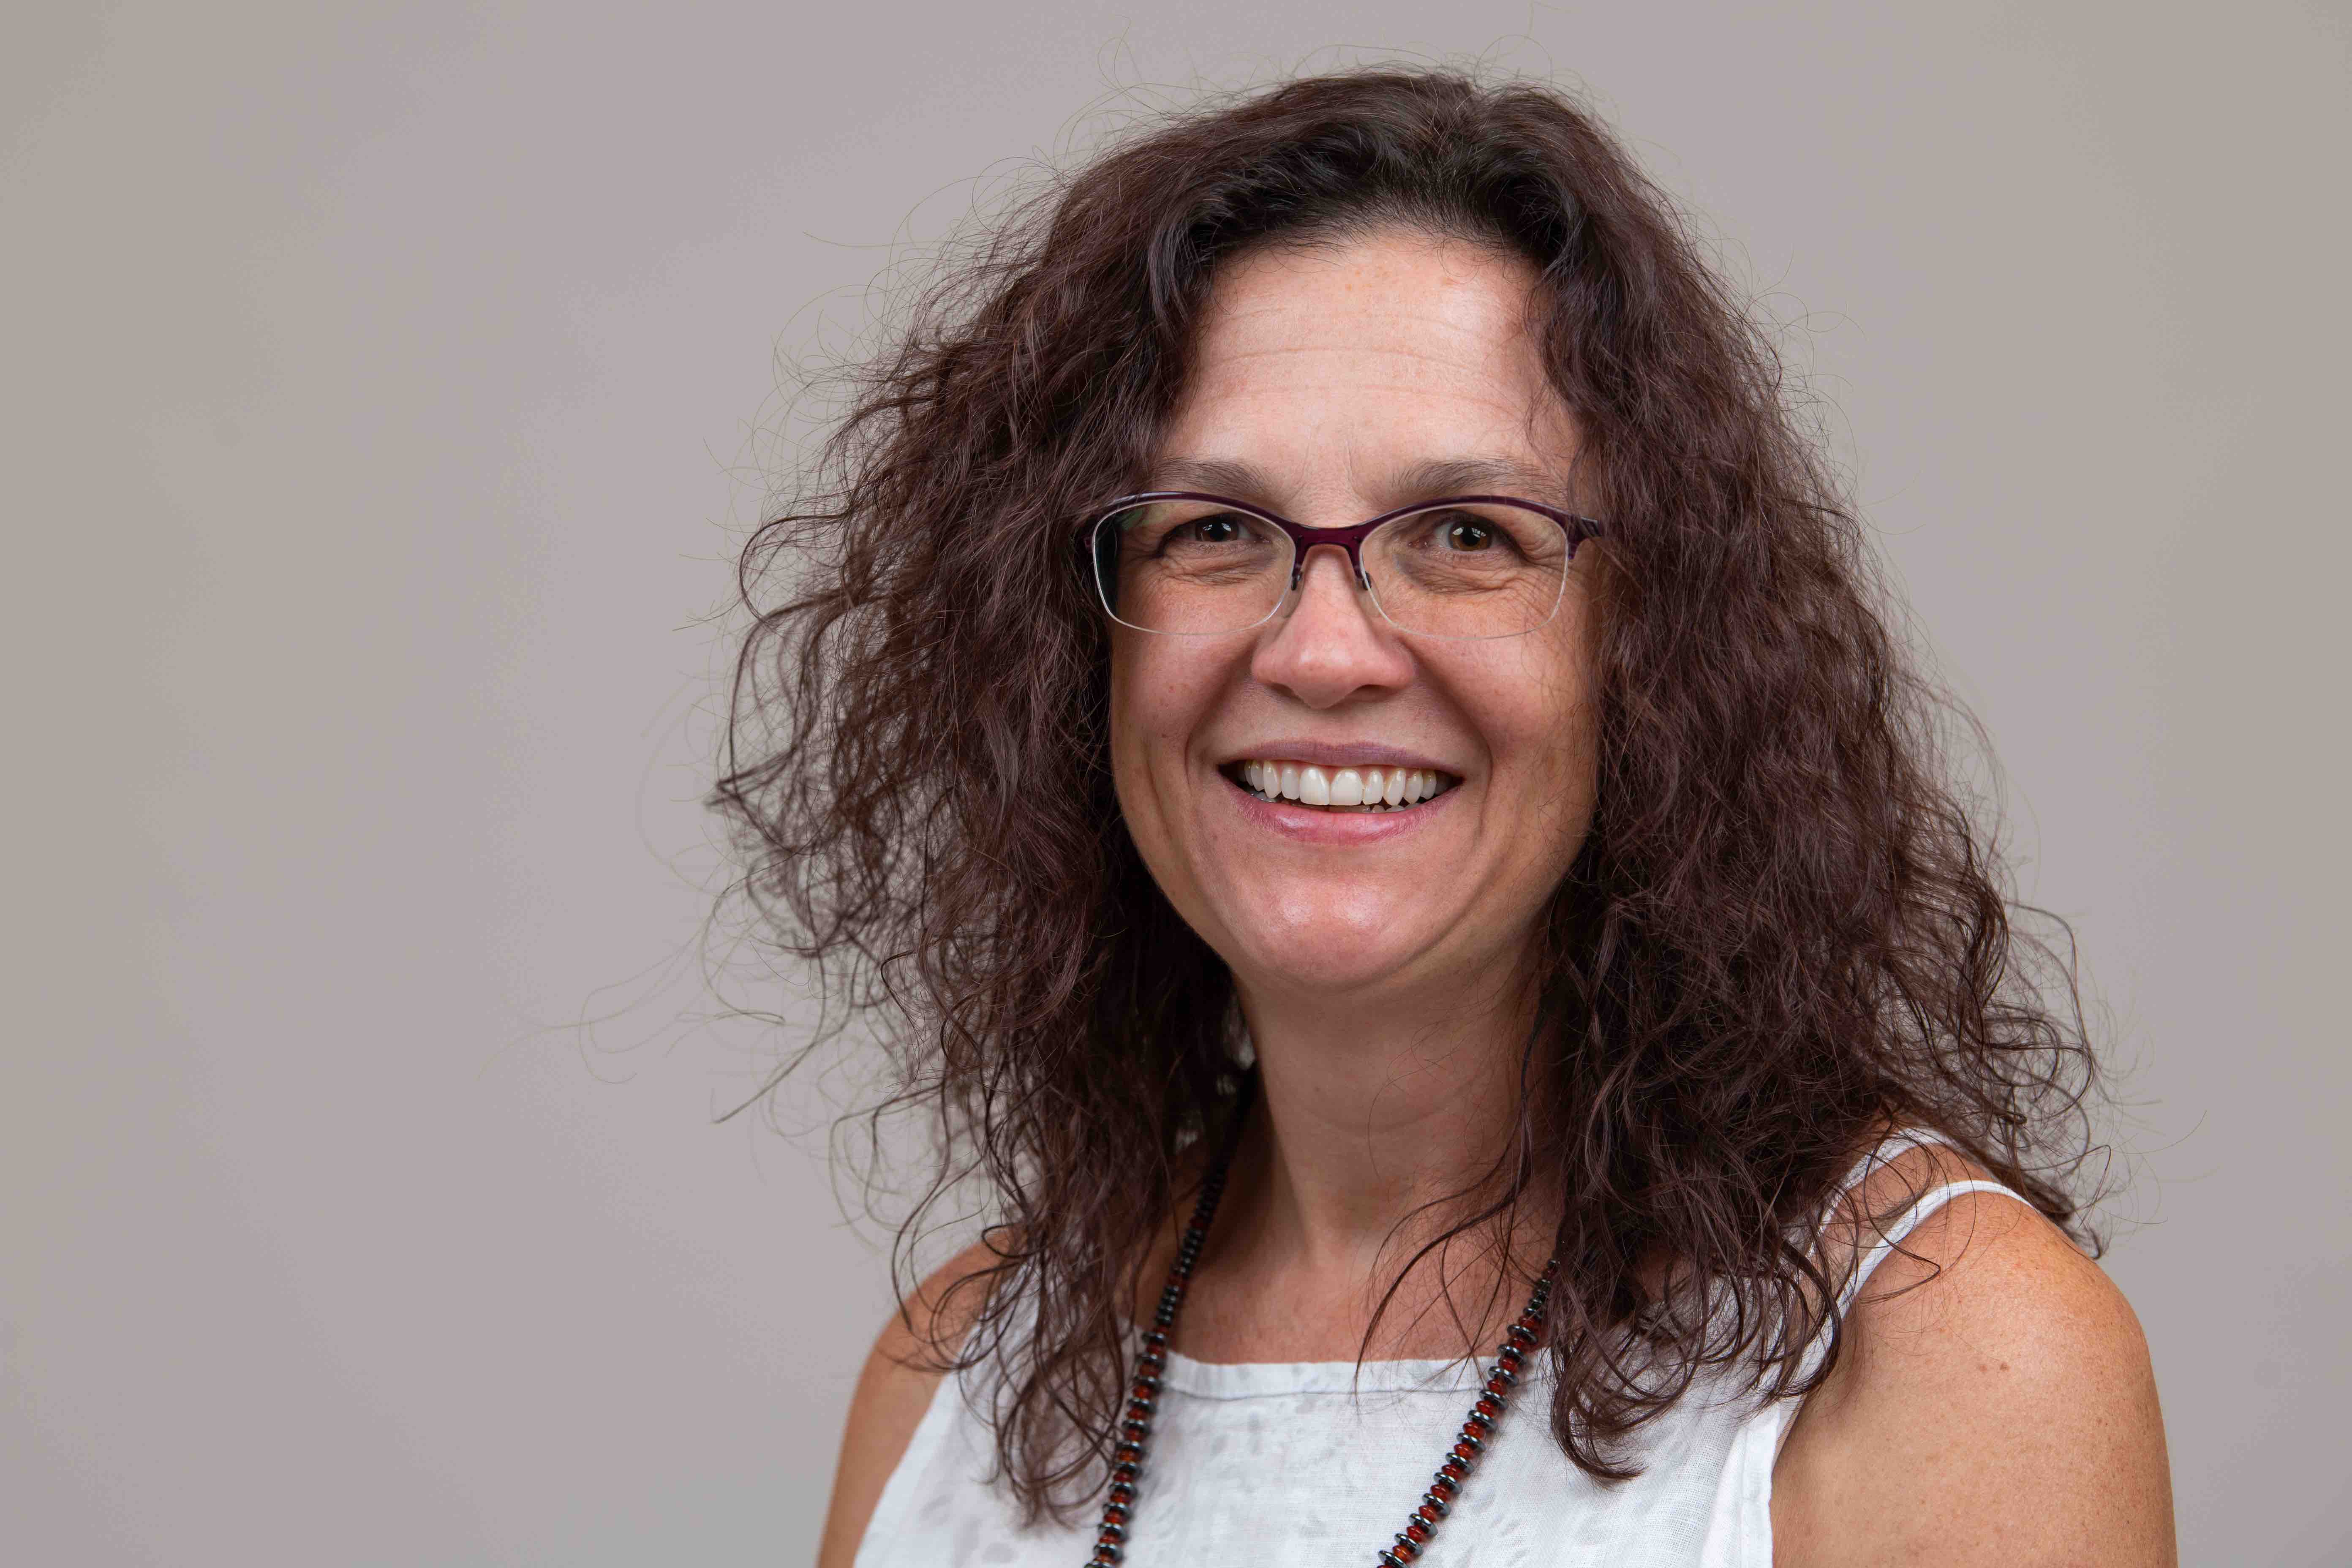 Aurora Clark is a University of Utah professor. She has a big smile, glasses, shoulder-length brown curly hair and is wearing a white sleeveless dress.